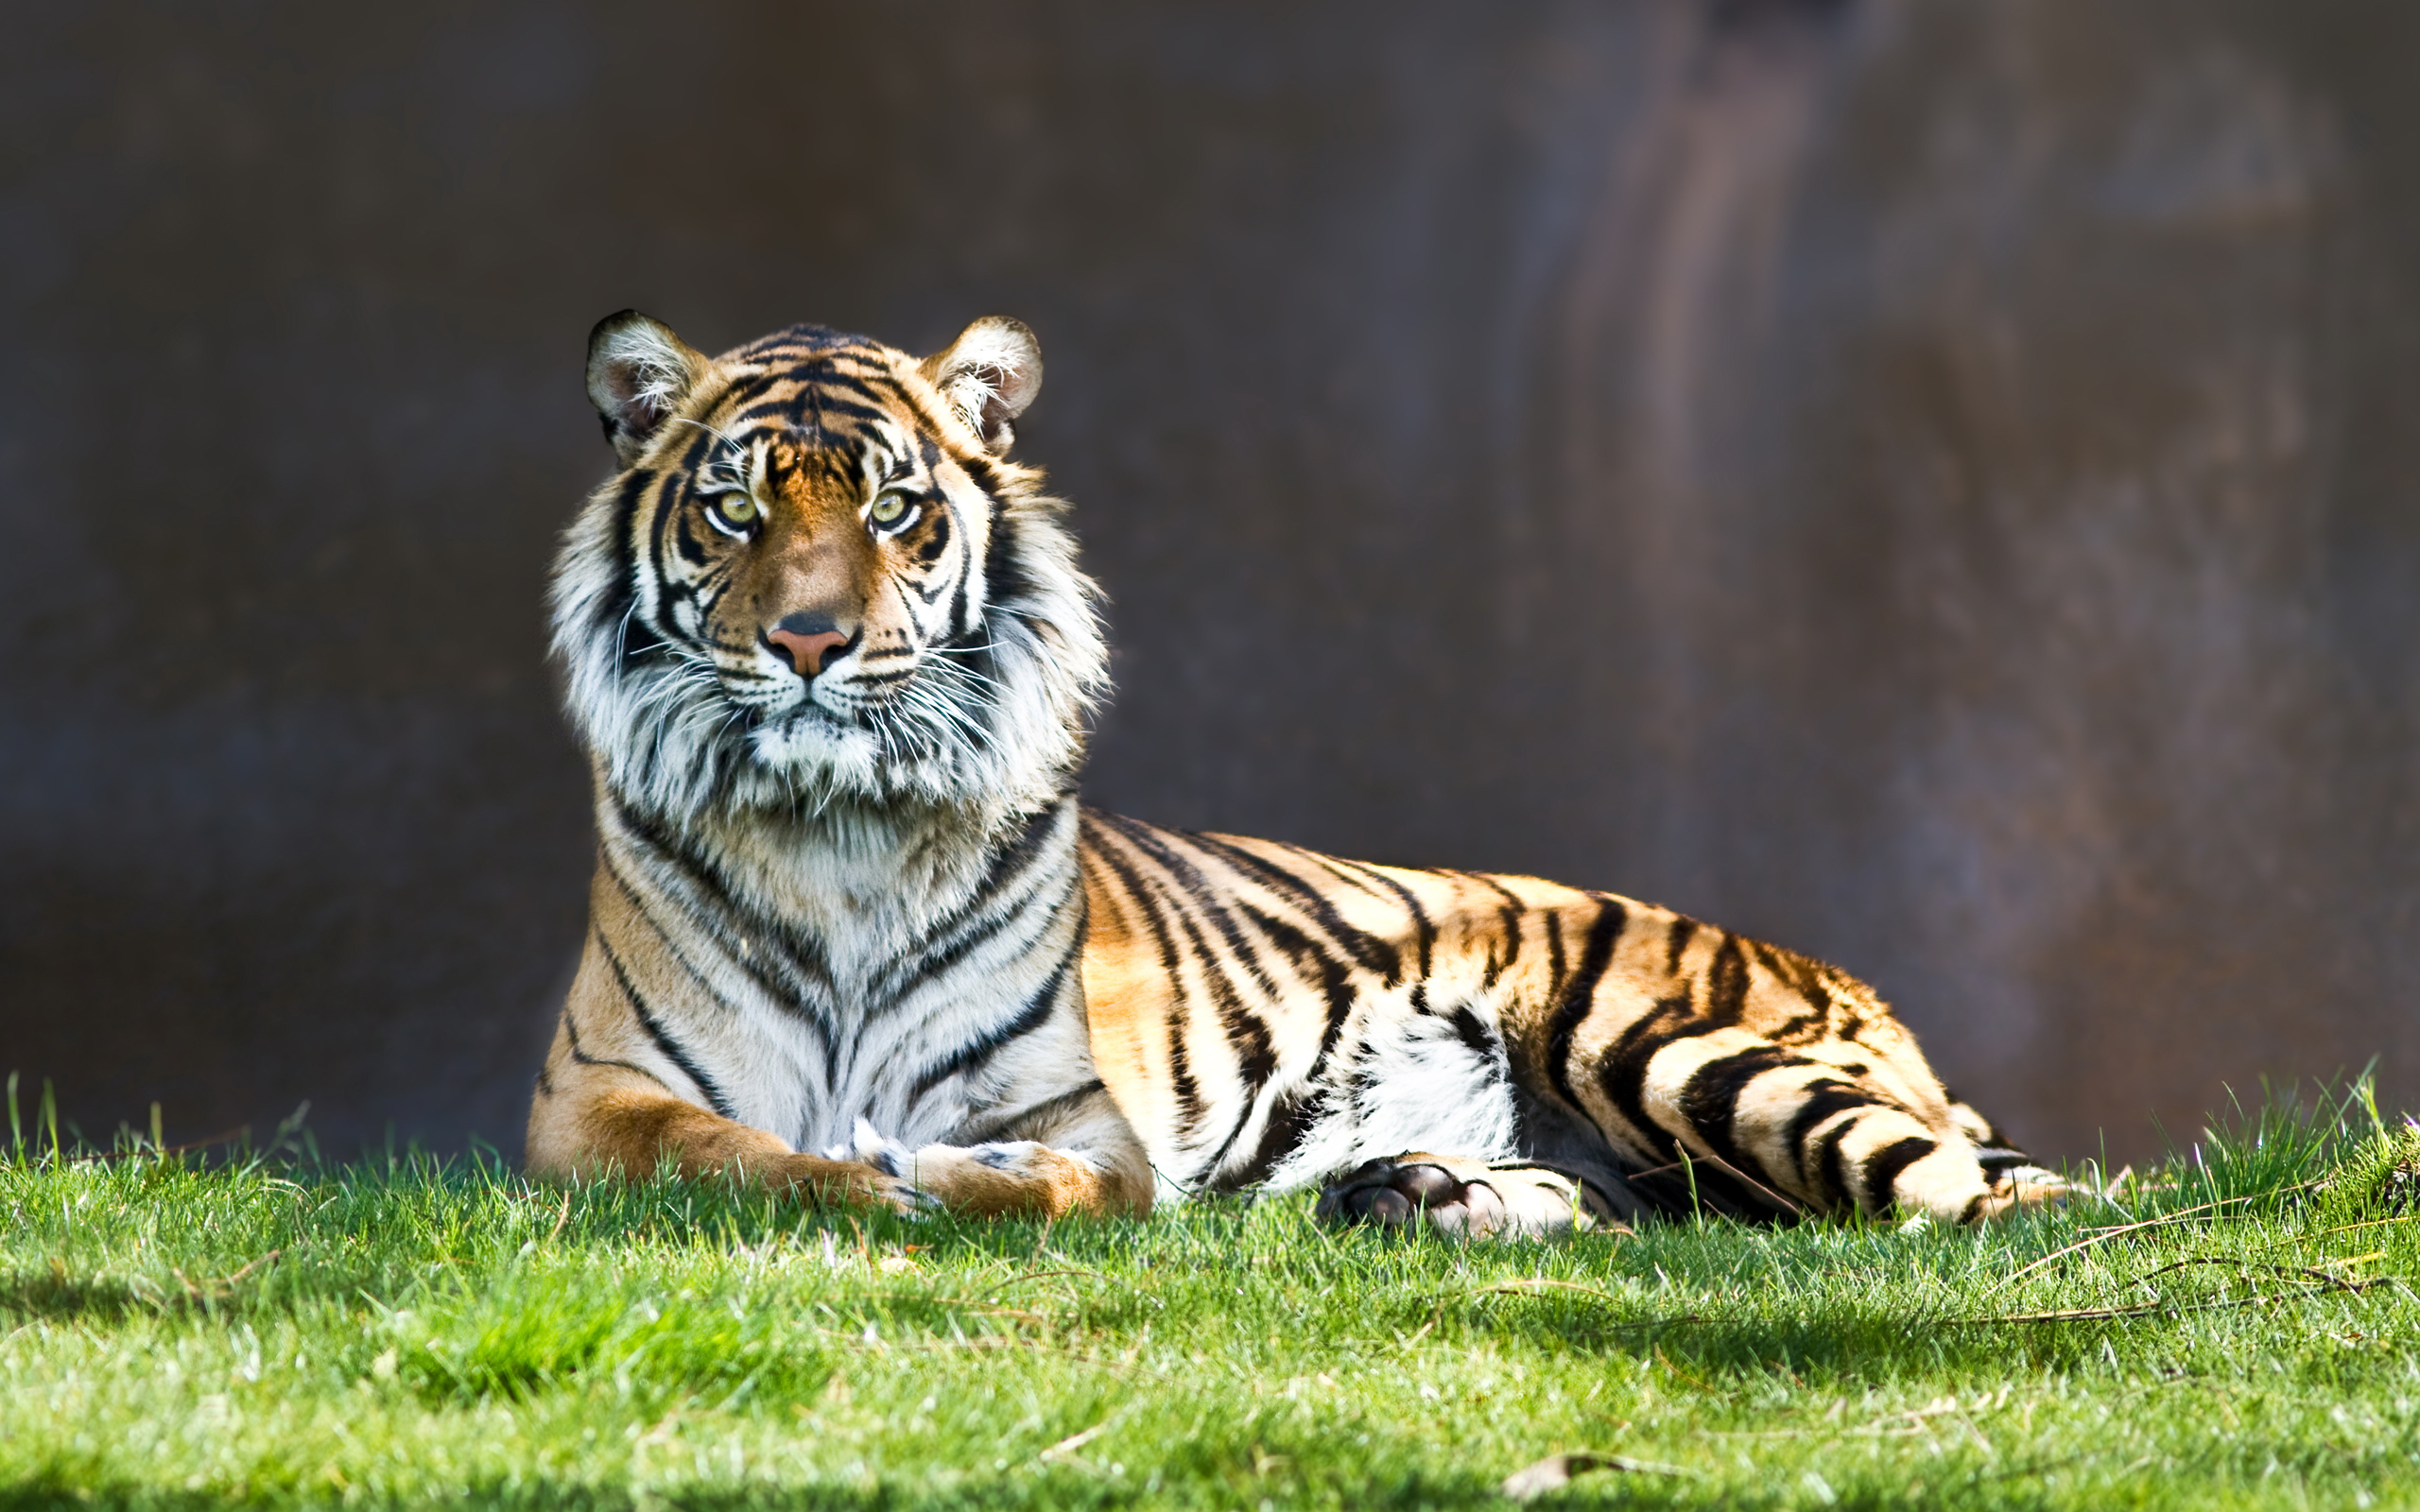 Download tiger staring wallpaper & Background Free - Images, Photos ...